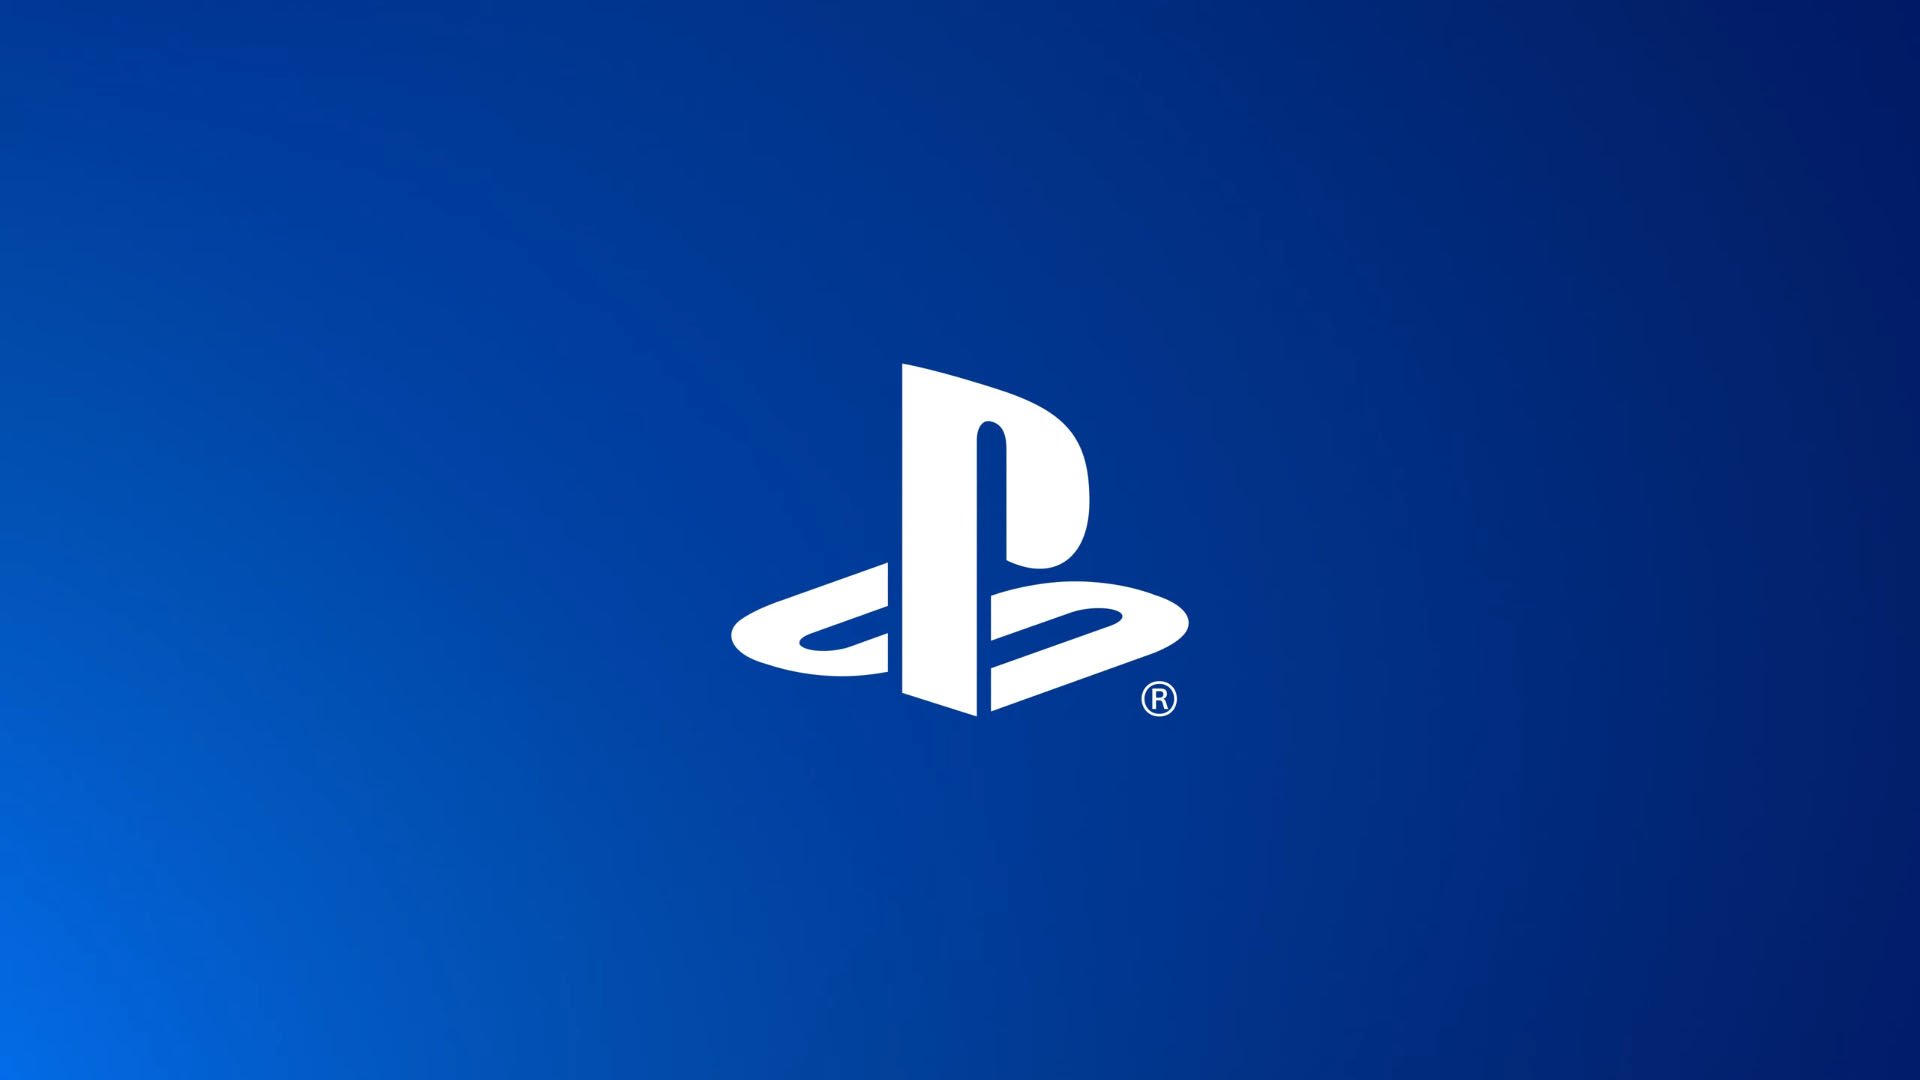 Did the PS5 Showcase Event Deliver? - Talking Point